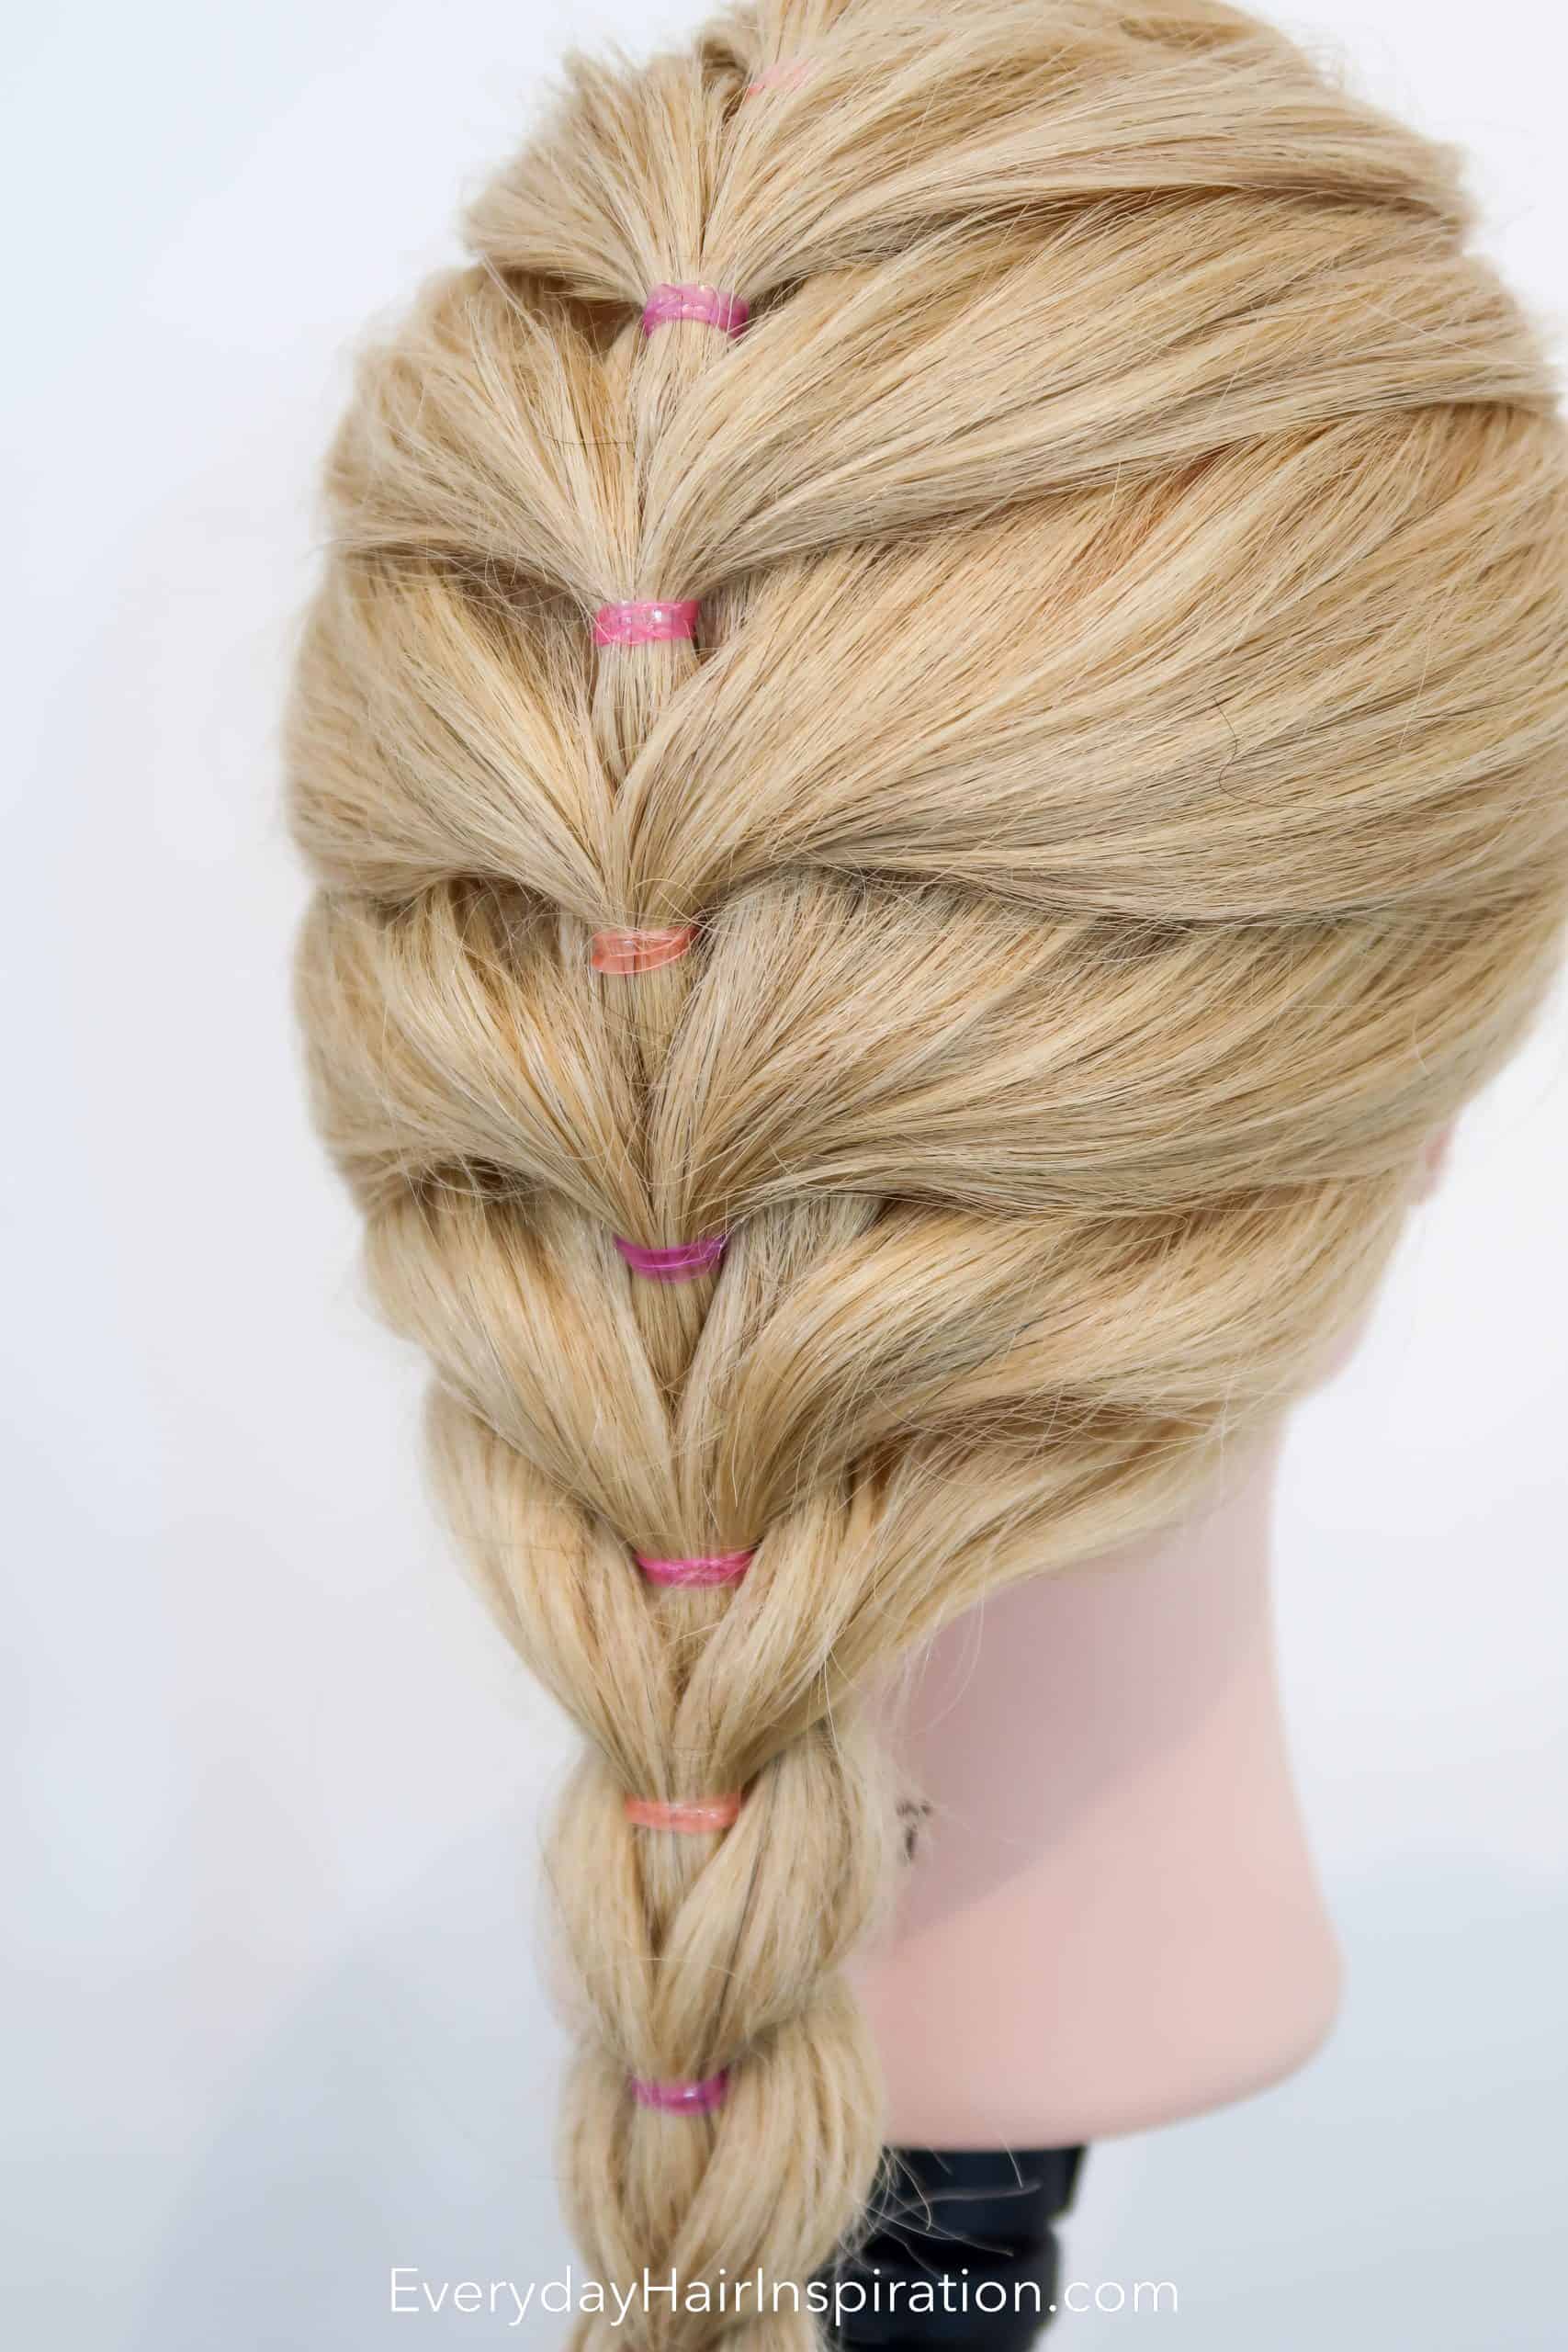 Faux French Braid Pigtails  Hair styles, French braid pigtails